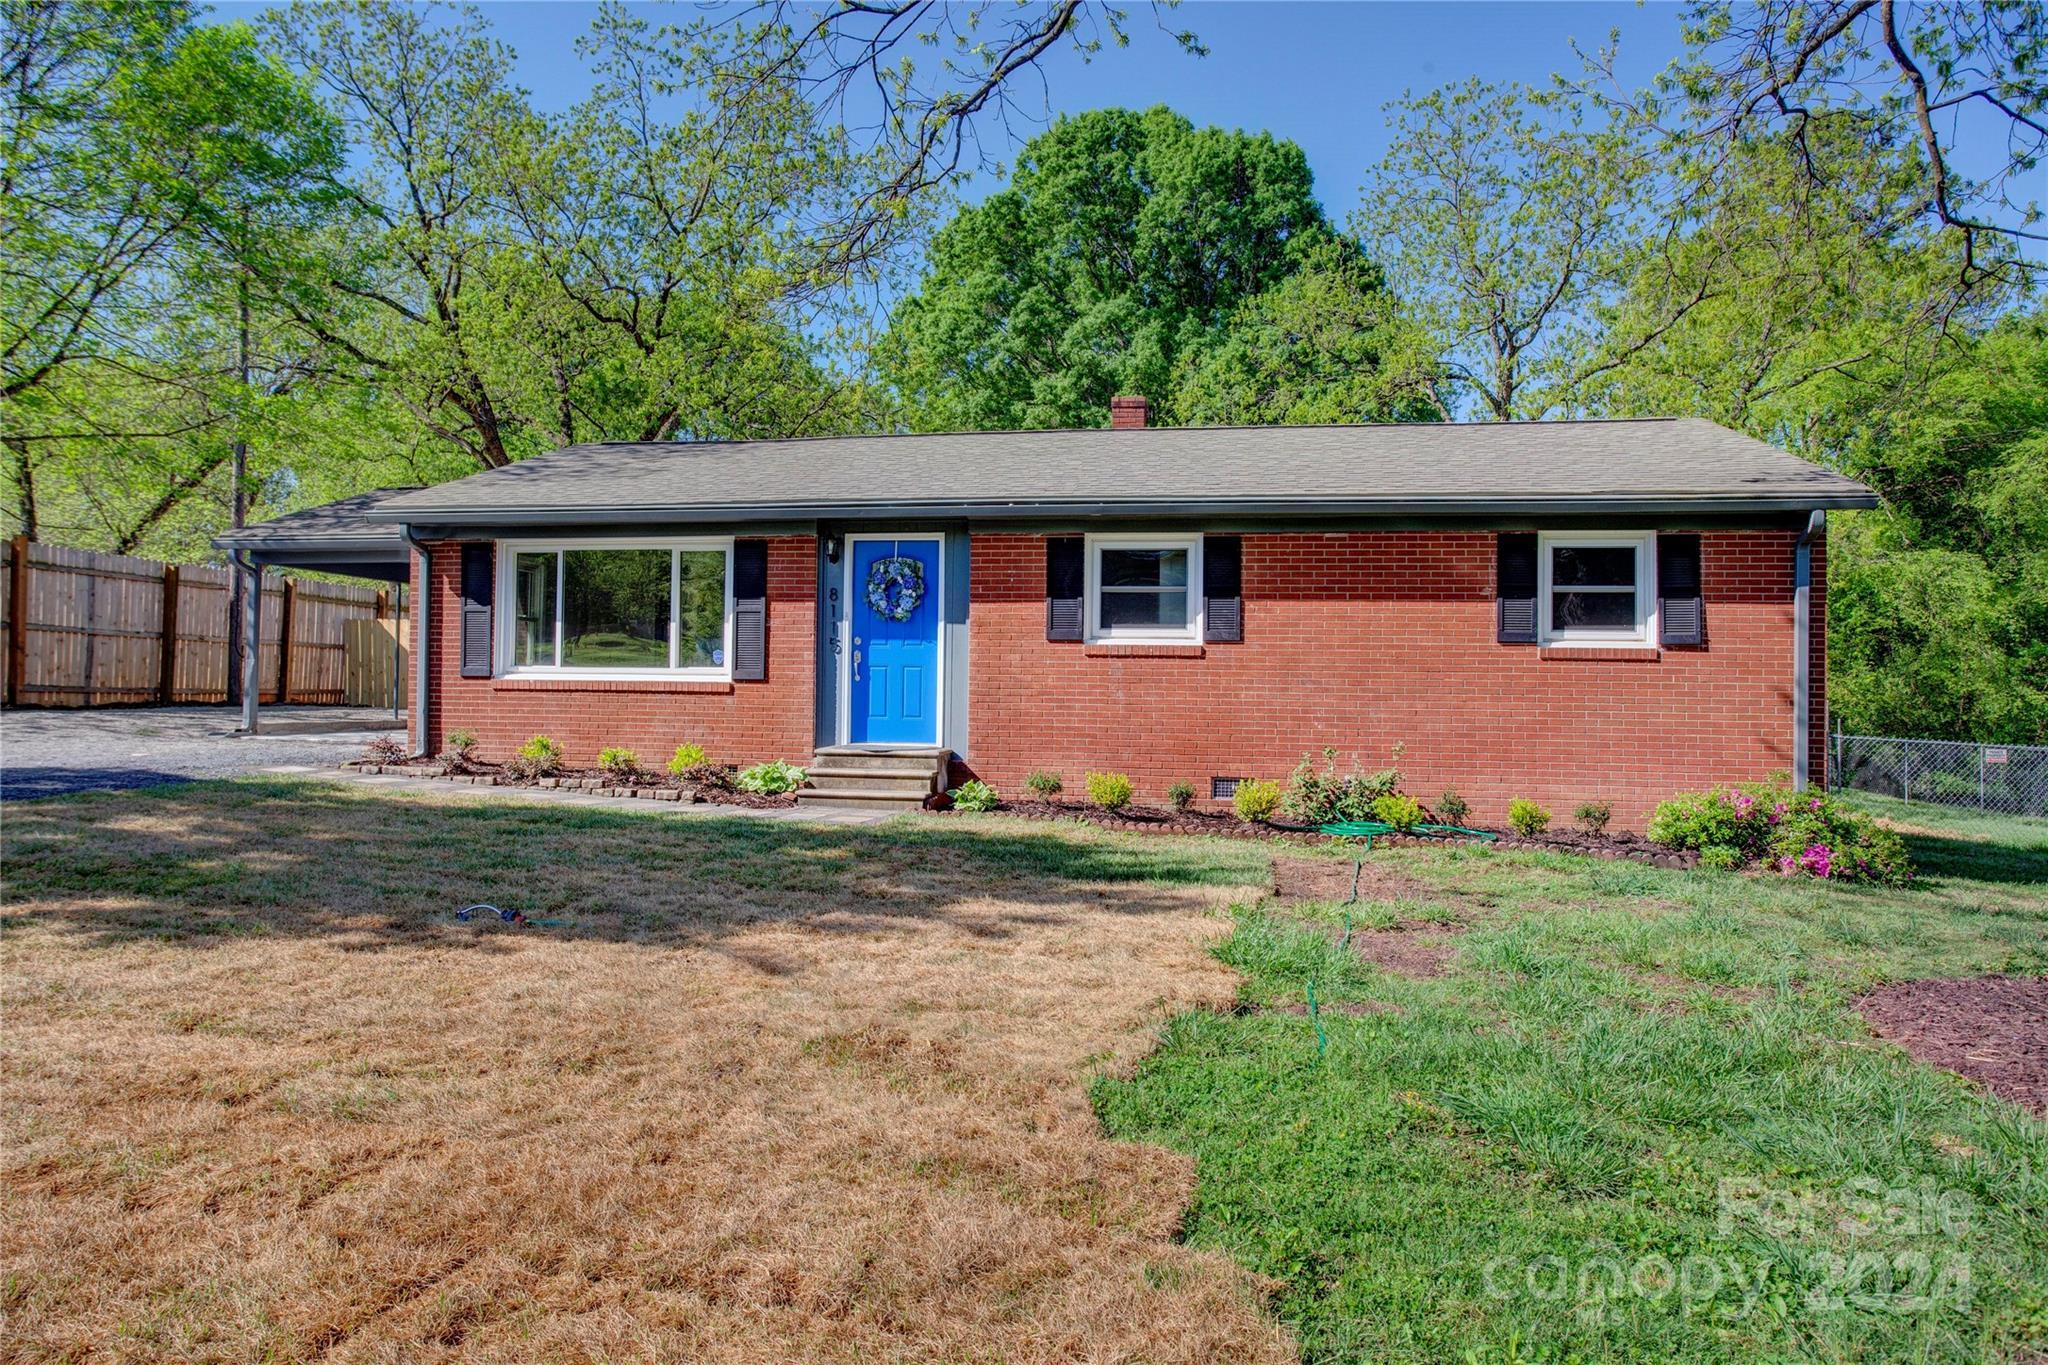 Photo one of 8115 Old Plank Rd Charlotte NC 28216 | MLS 4130555